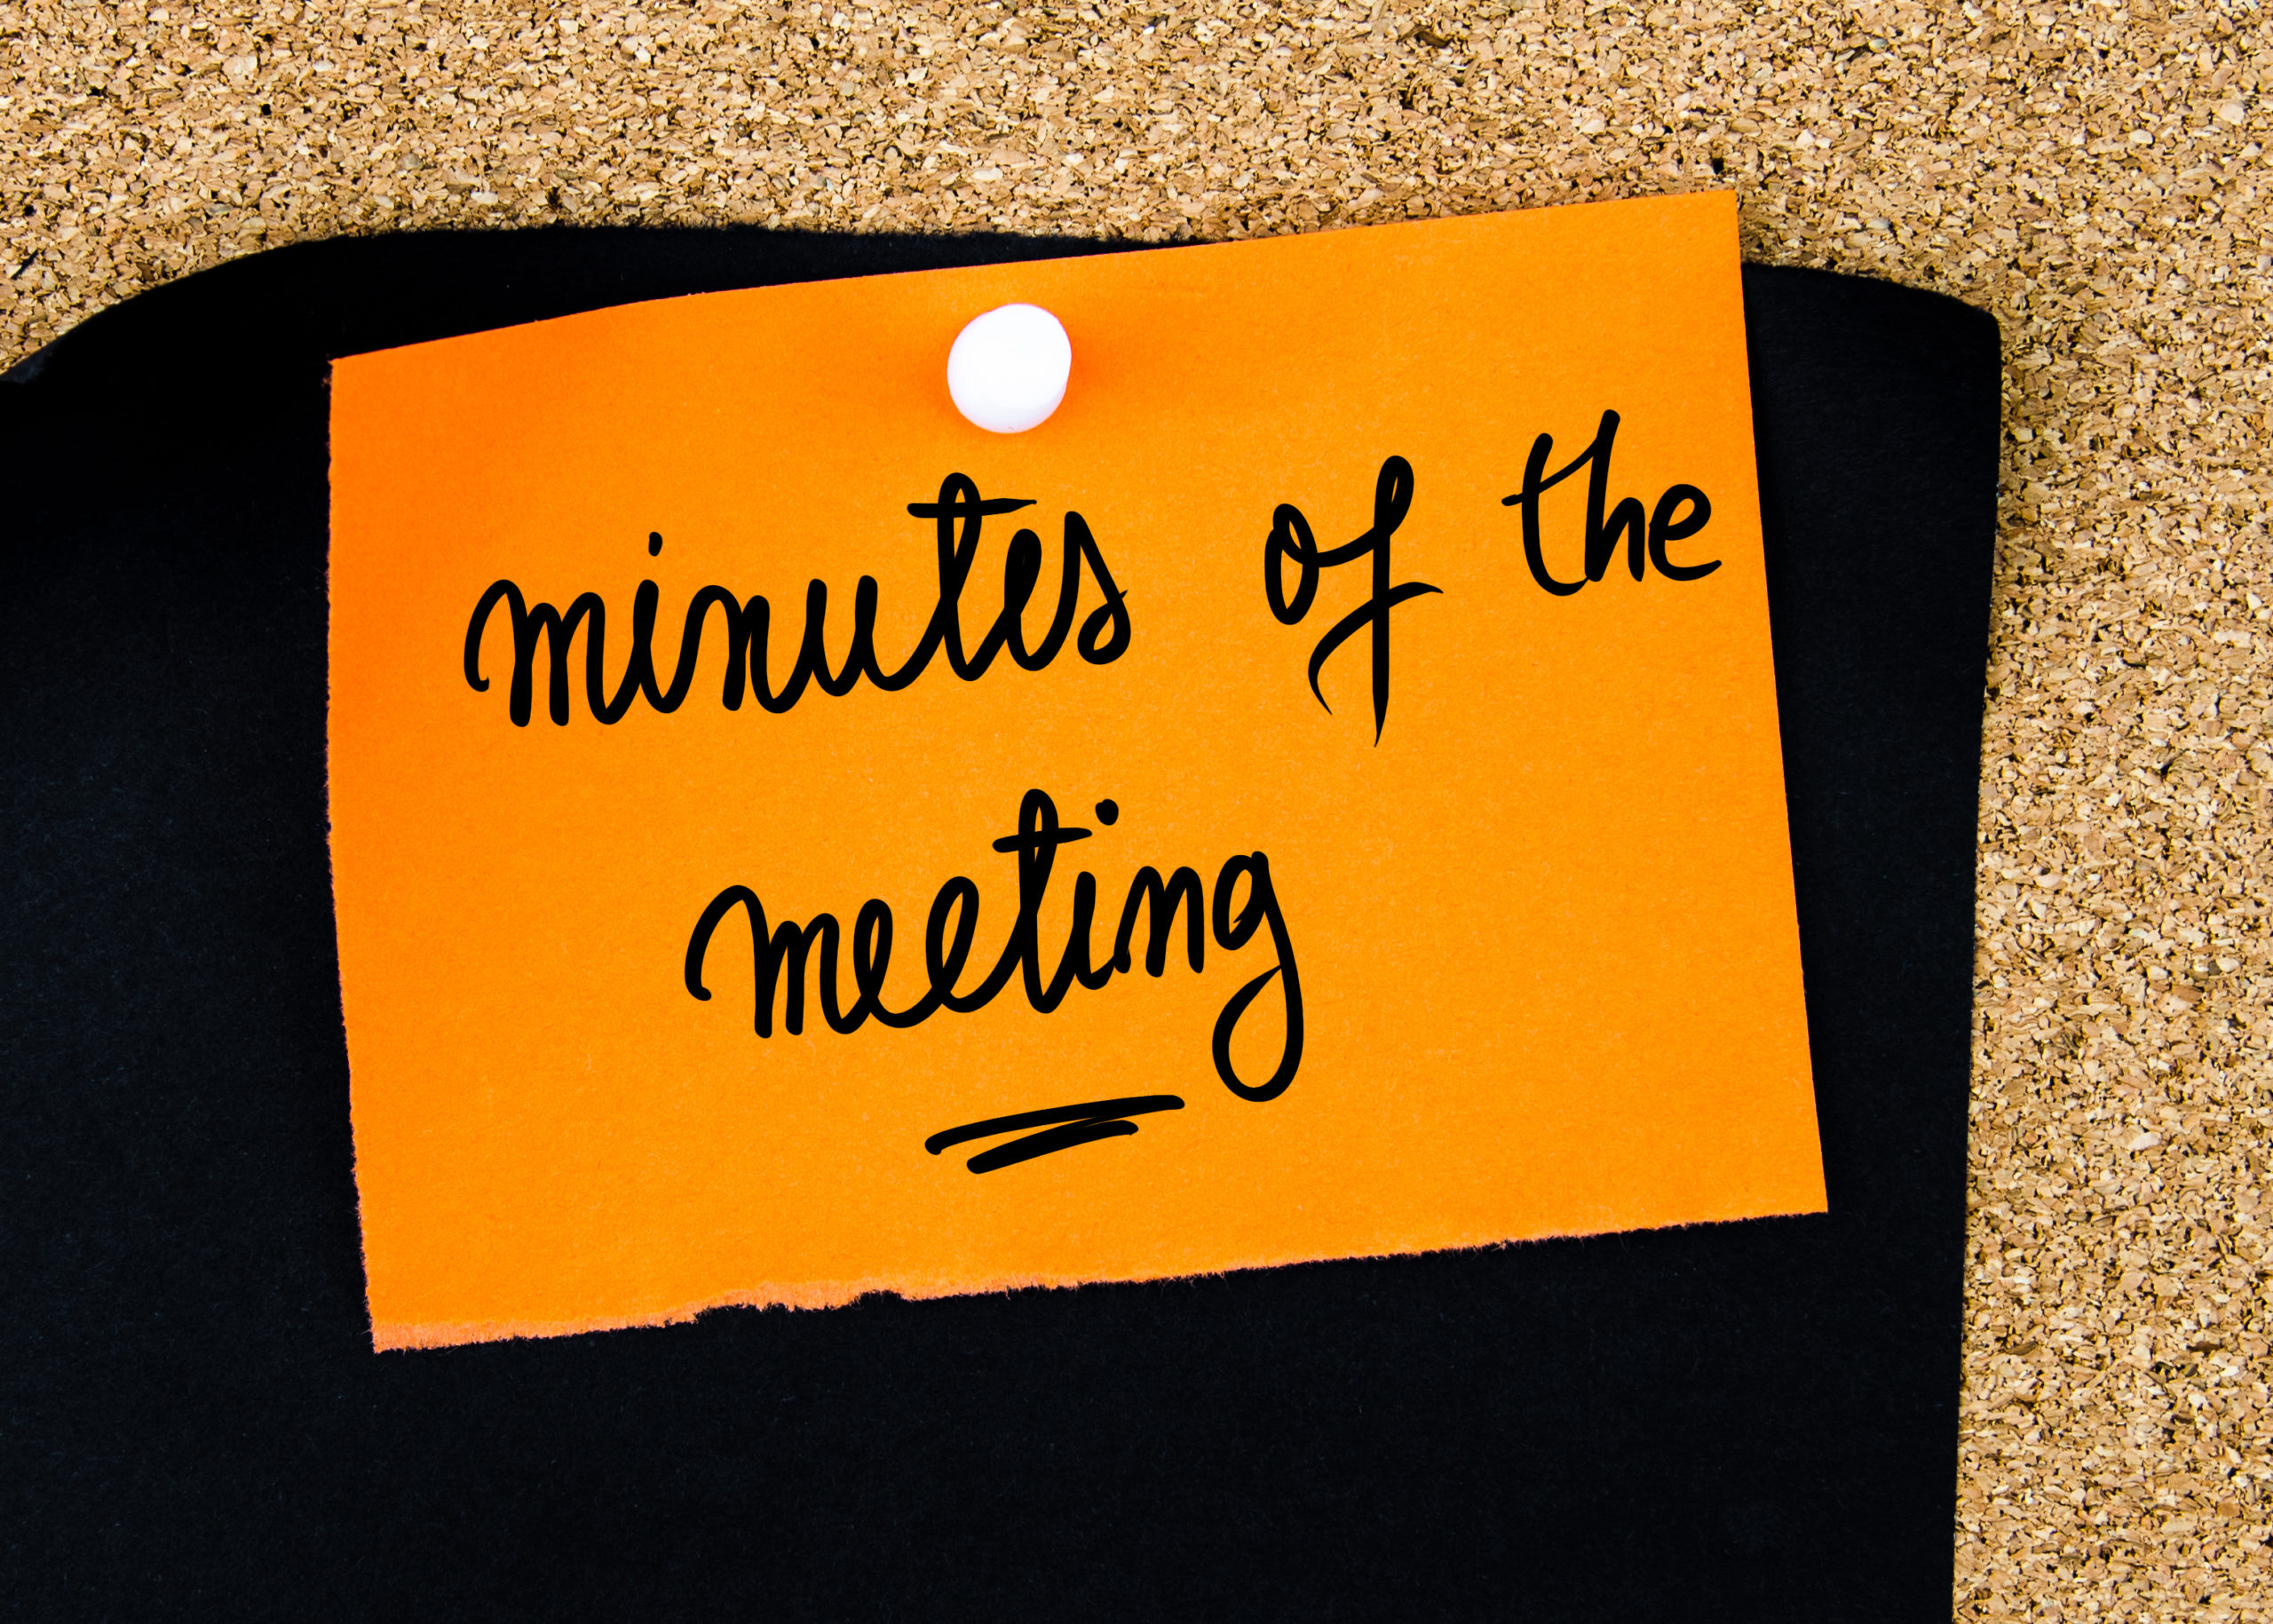 Minutes Of The Meeting written on orange paper note pinned on cork board with white thumbtacks, copy space available